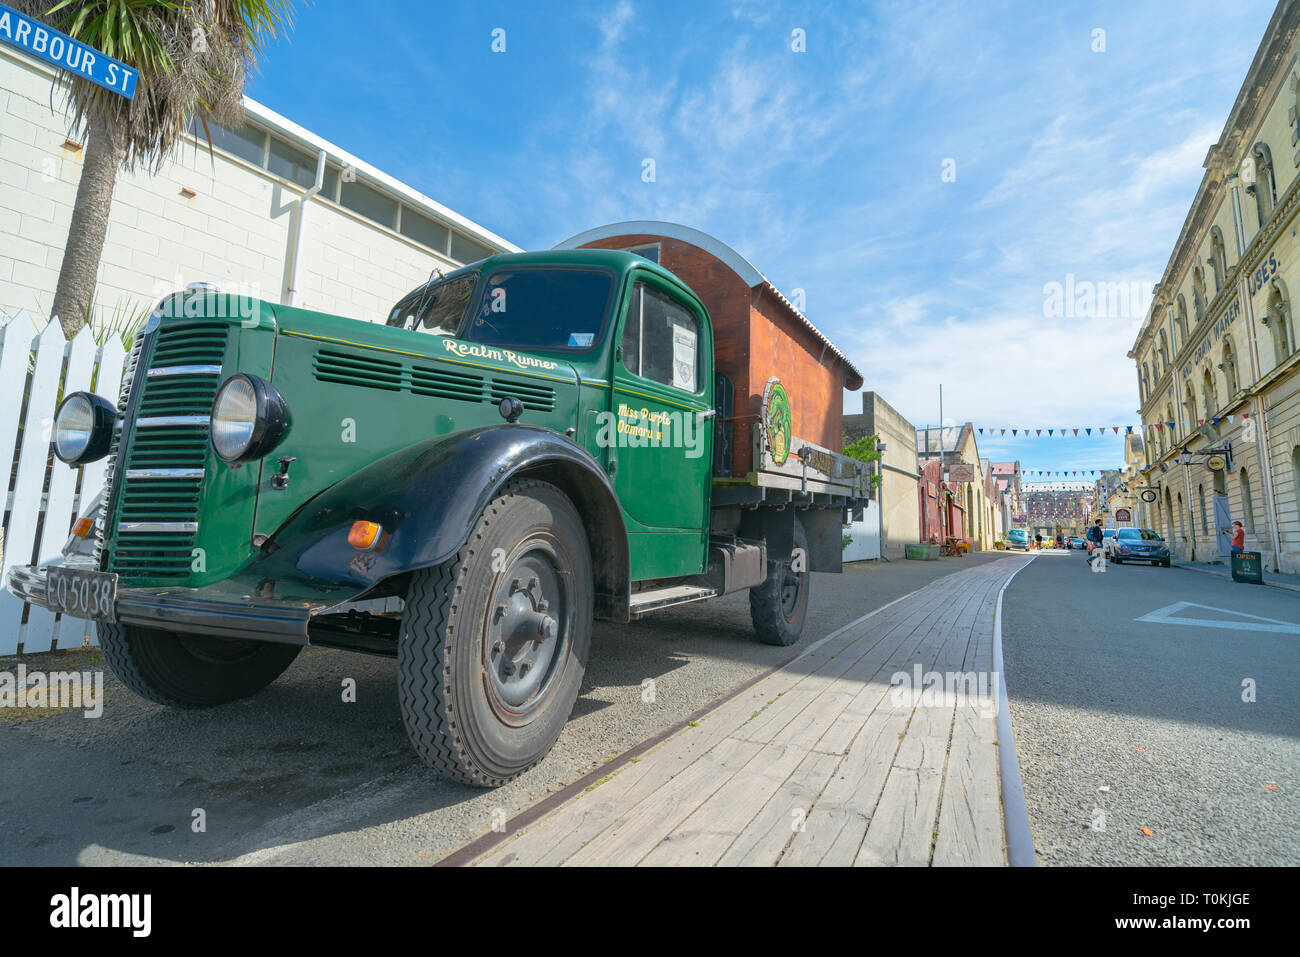 OAMARU NEW ZEALAND - OCTOBER 24 2018; Vintage green Bedford truck Miss Purple or Realm Runner converted to house-truck parked on side of intersection Stock Photo